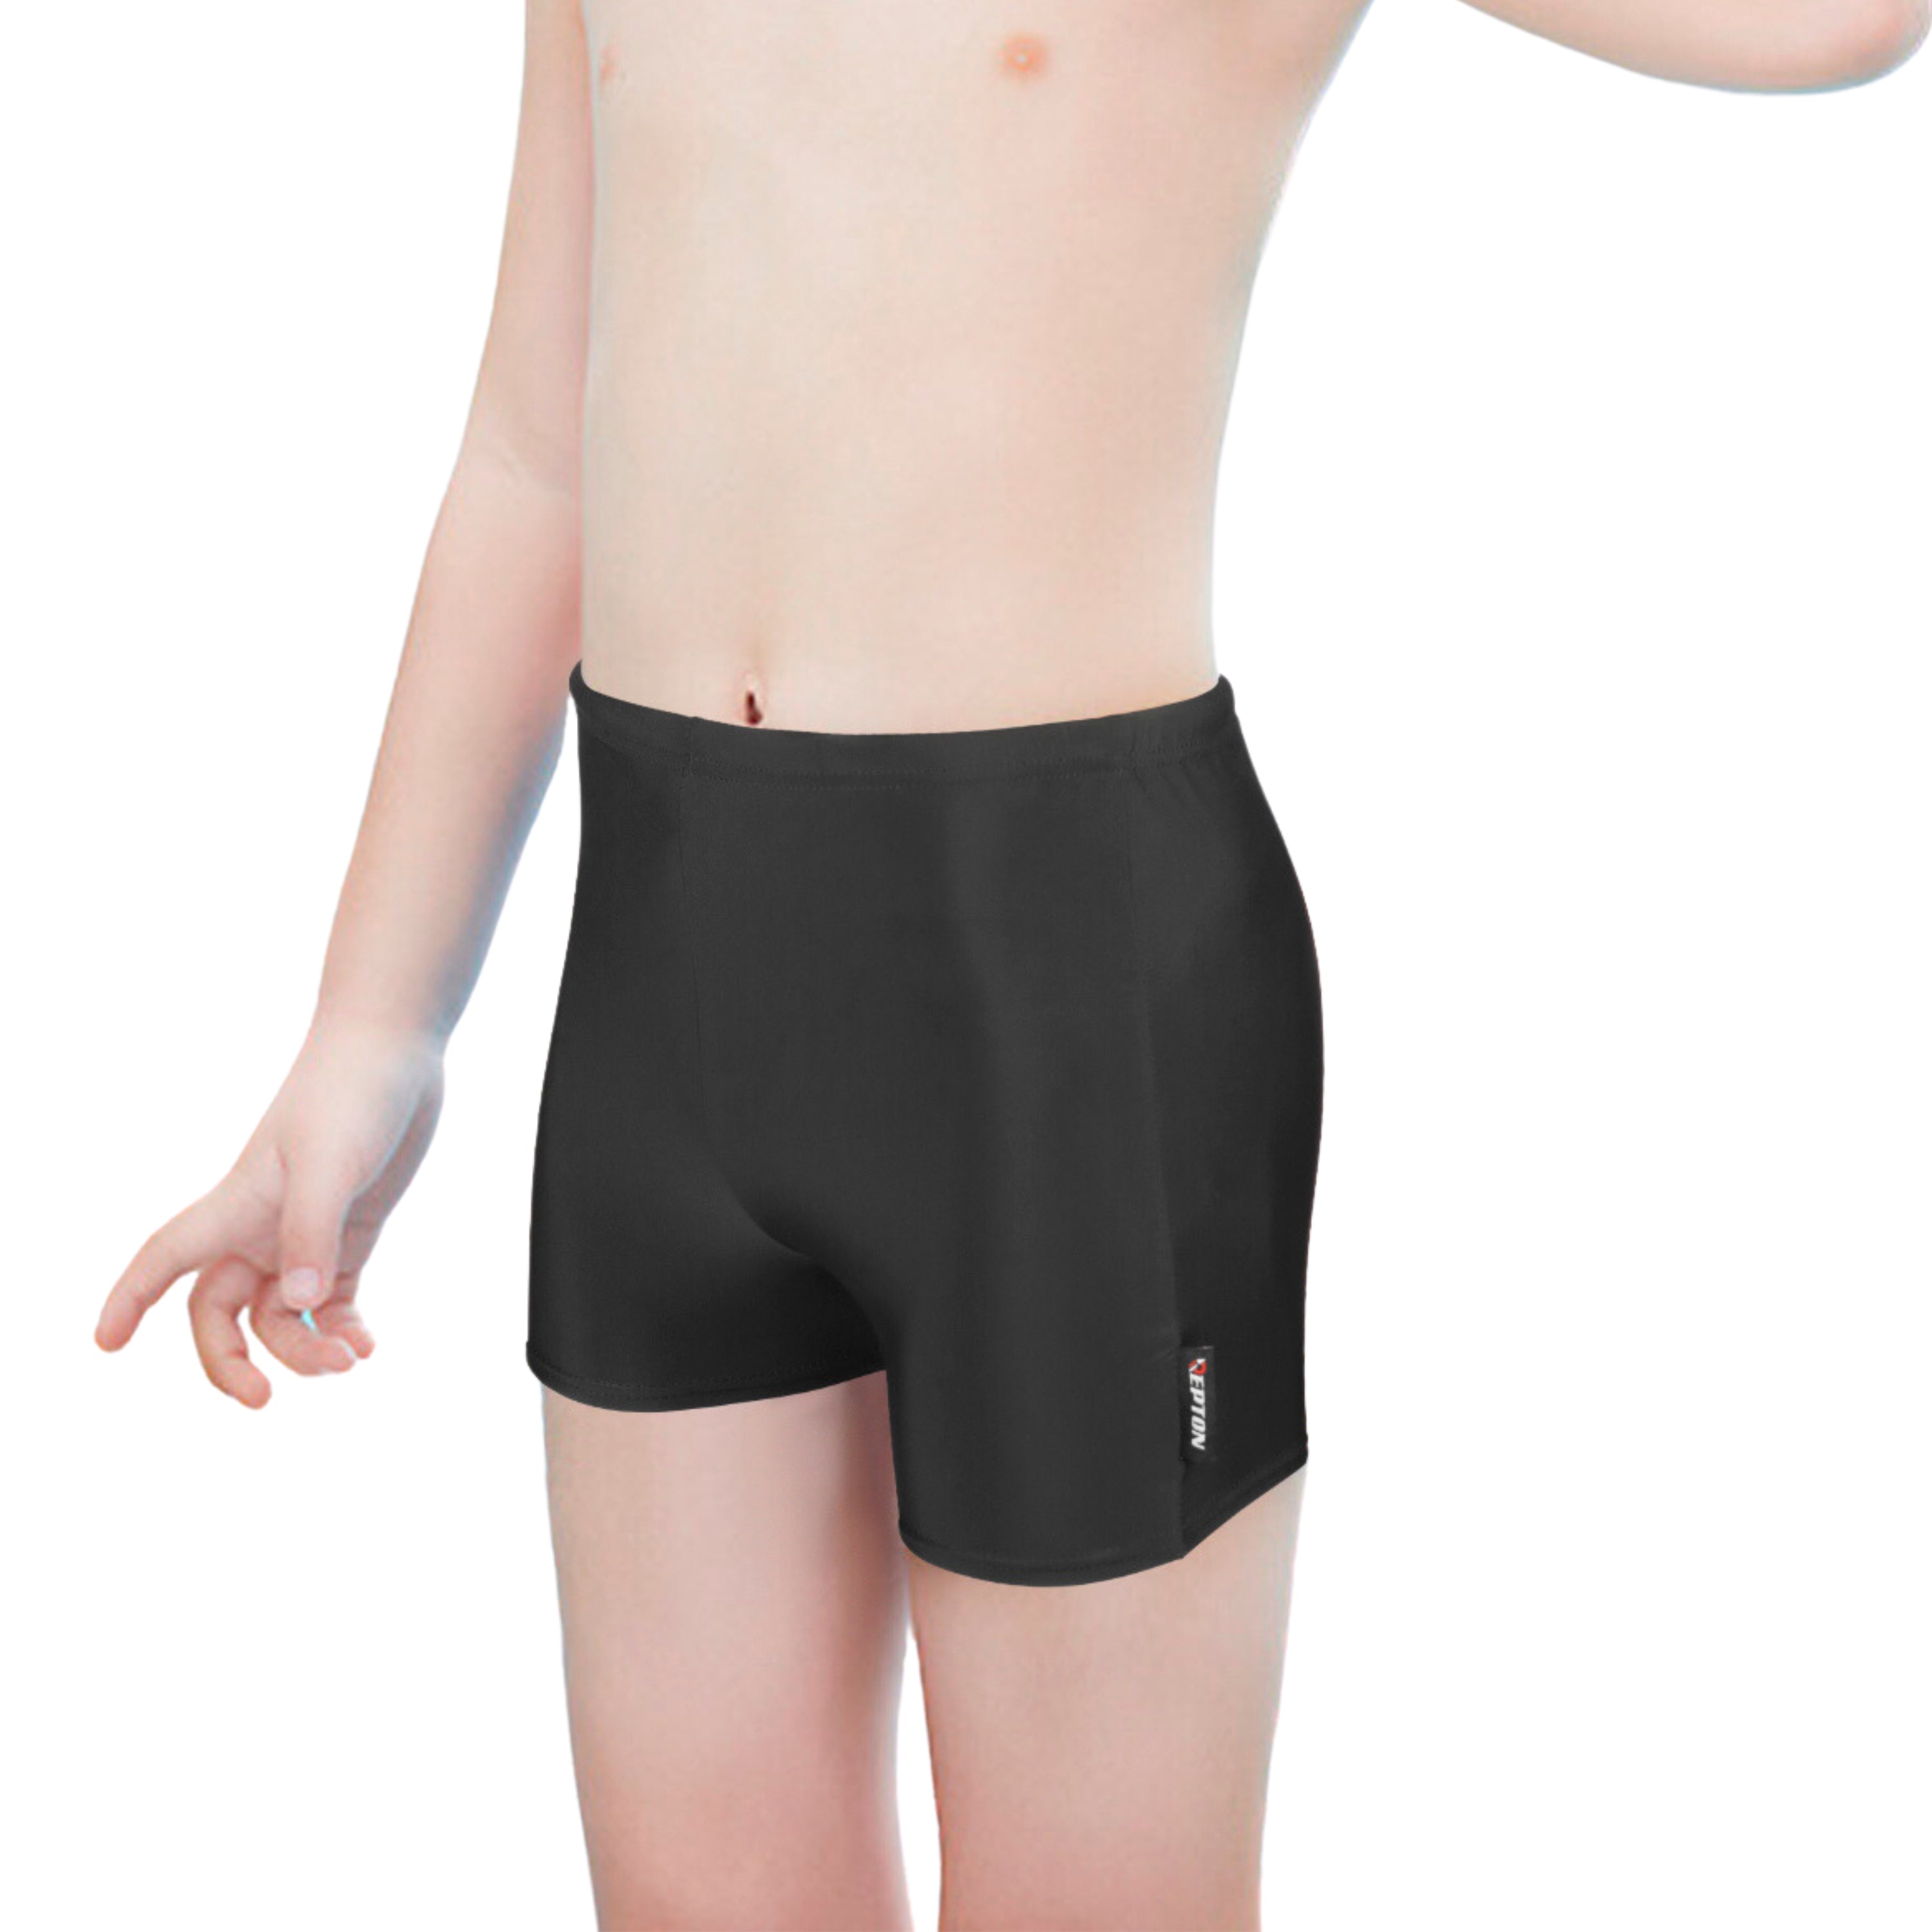 RFG Gears Swim Shorts for Men and Kids - Quick Dry Beach Trunks with Adjustable Drawstring Repton Fitness Gear